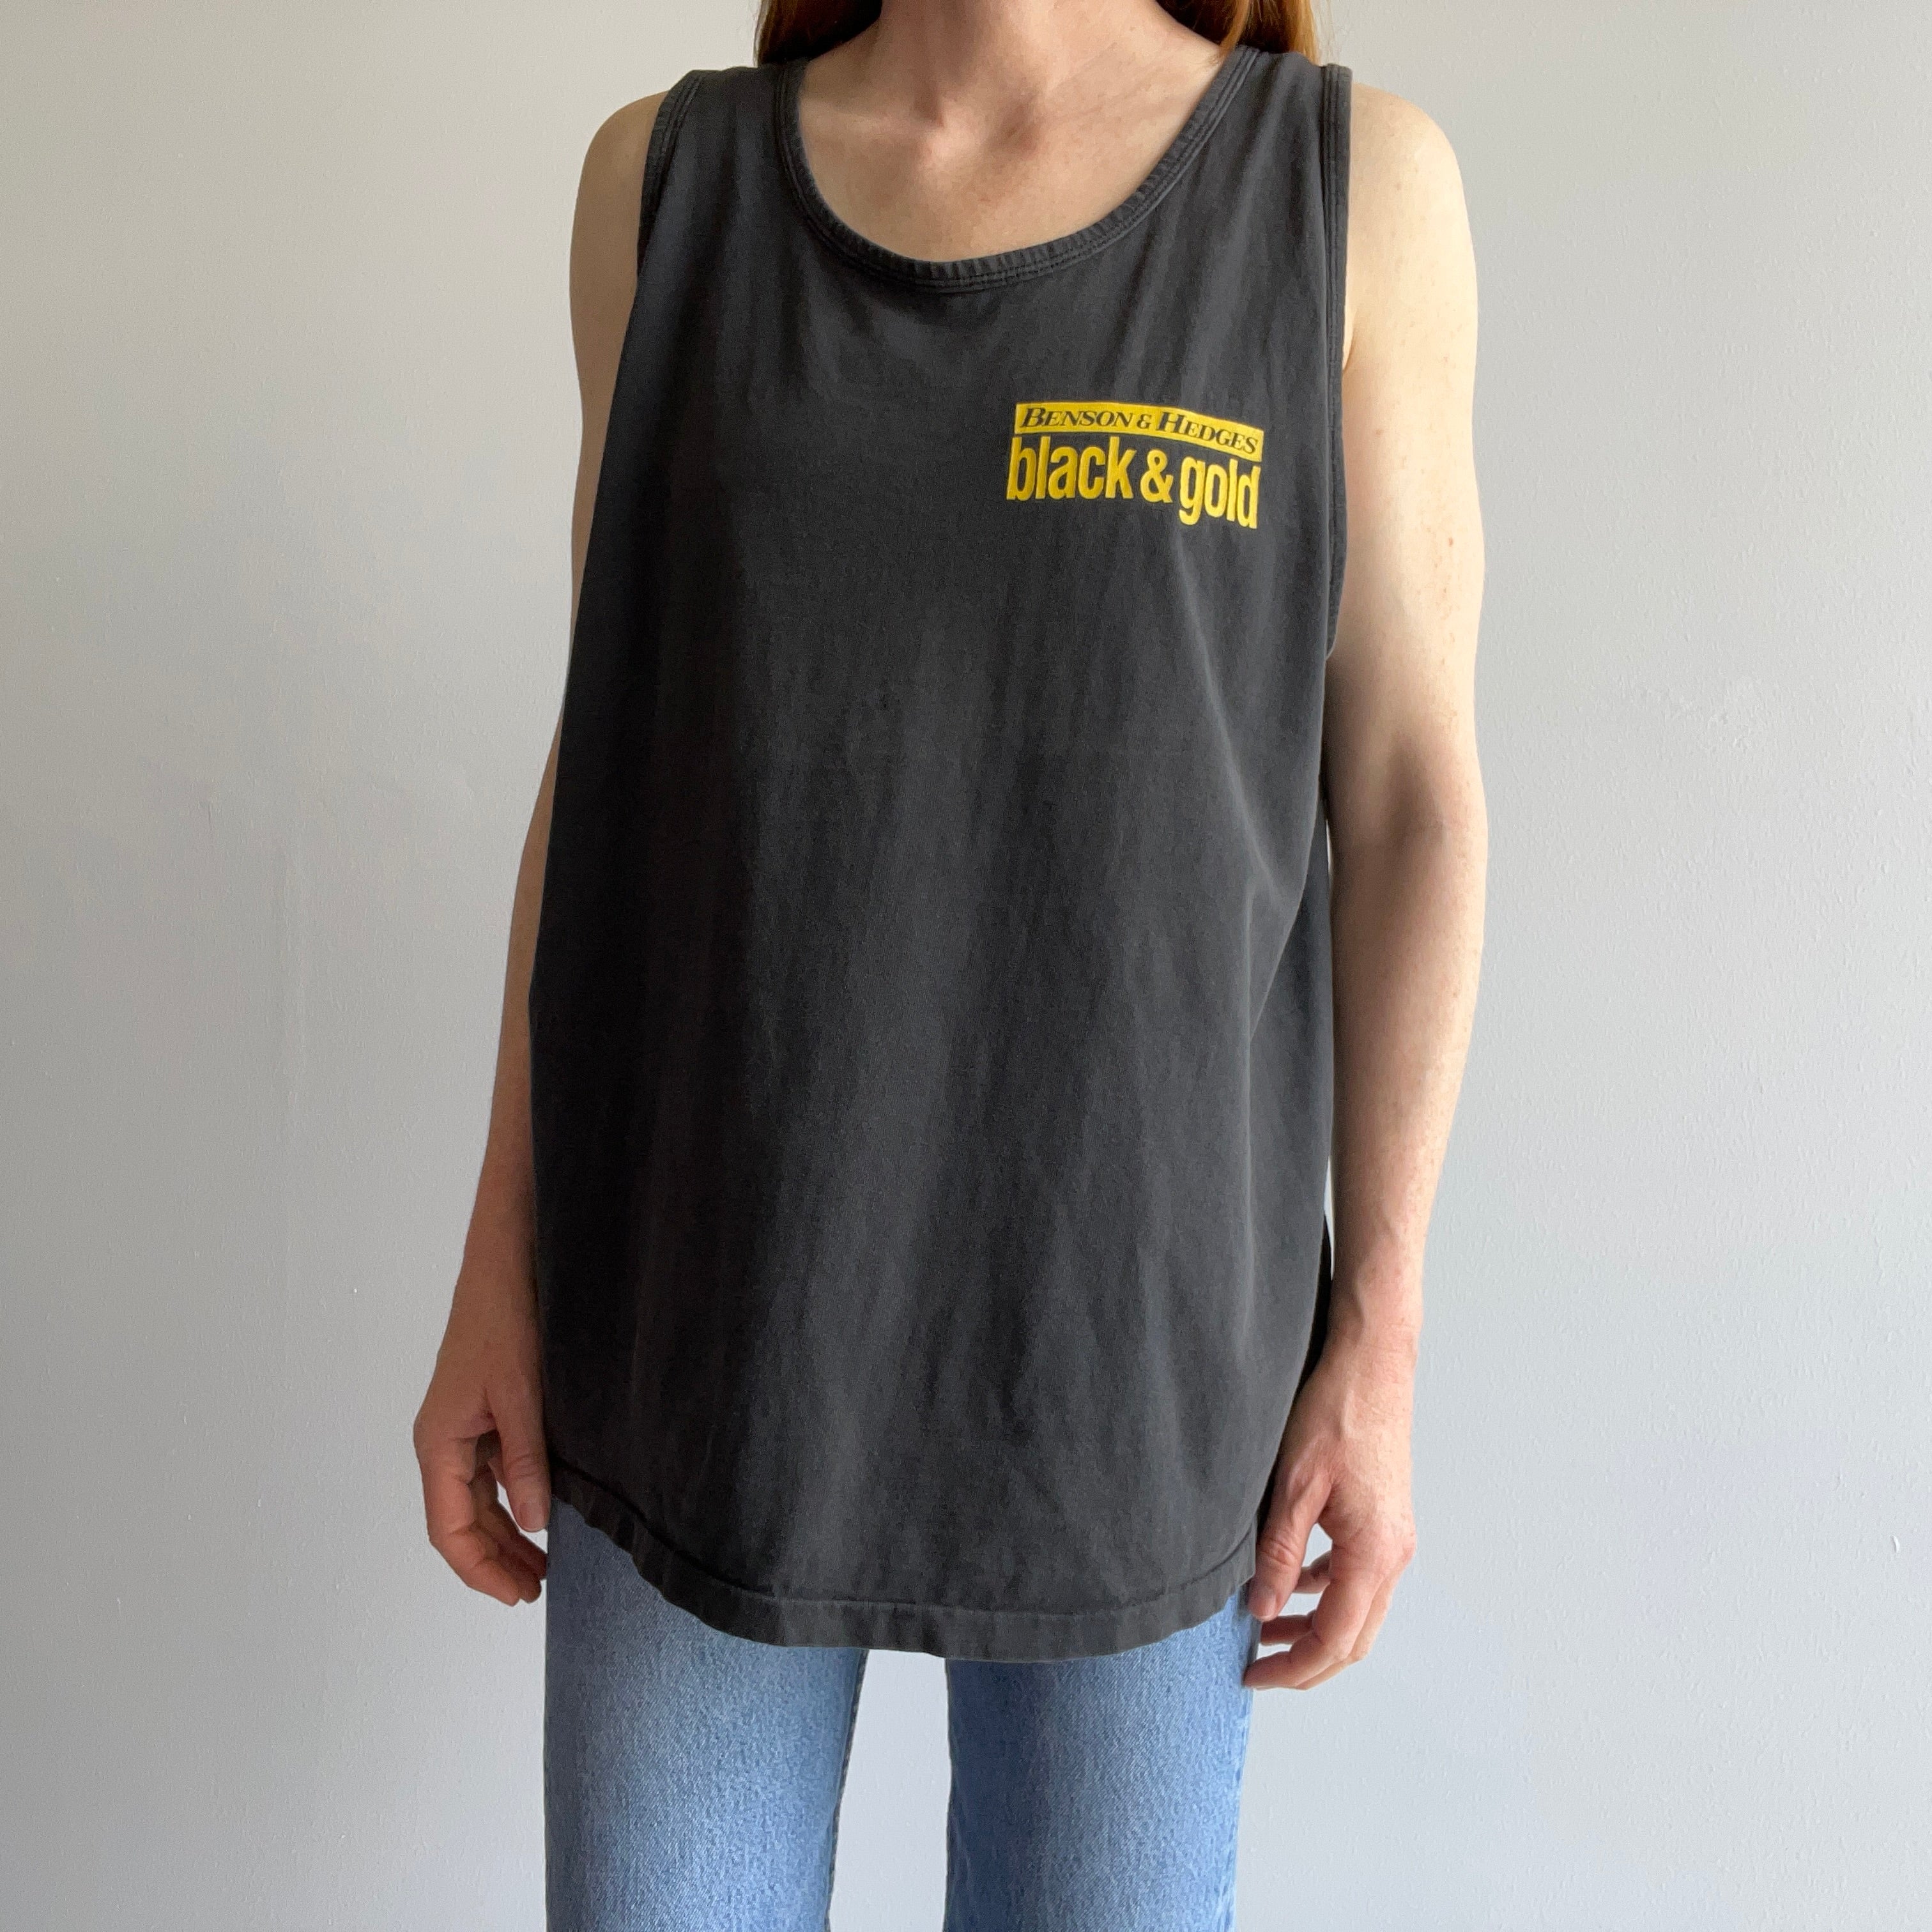 1980s Benson & Hedges Black & Gold Tank Top - There's a backside